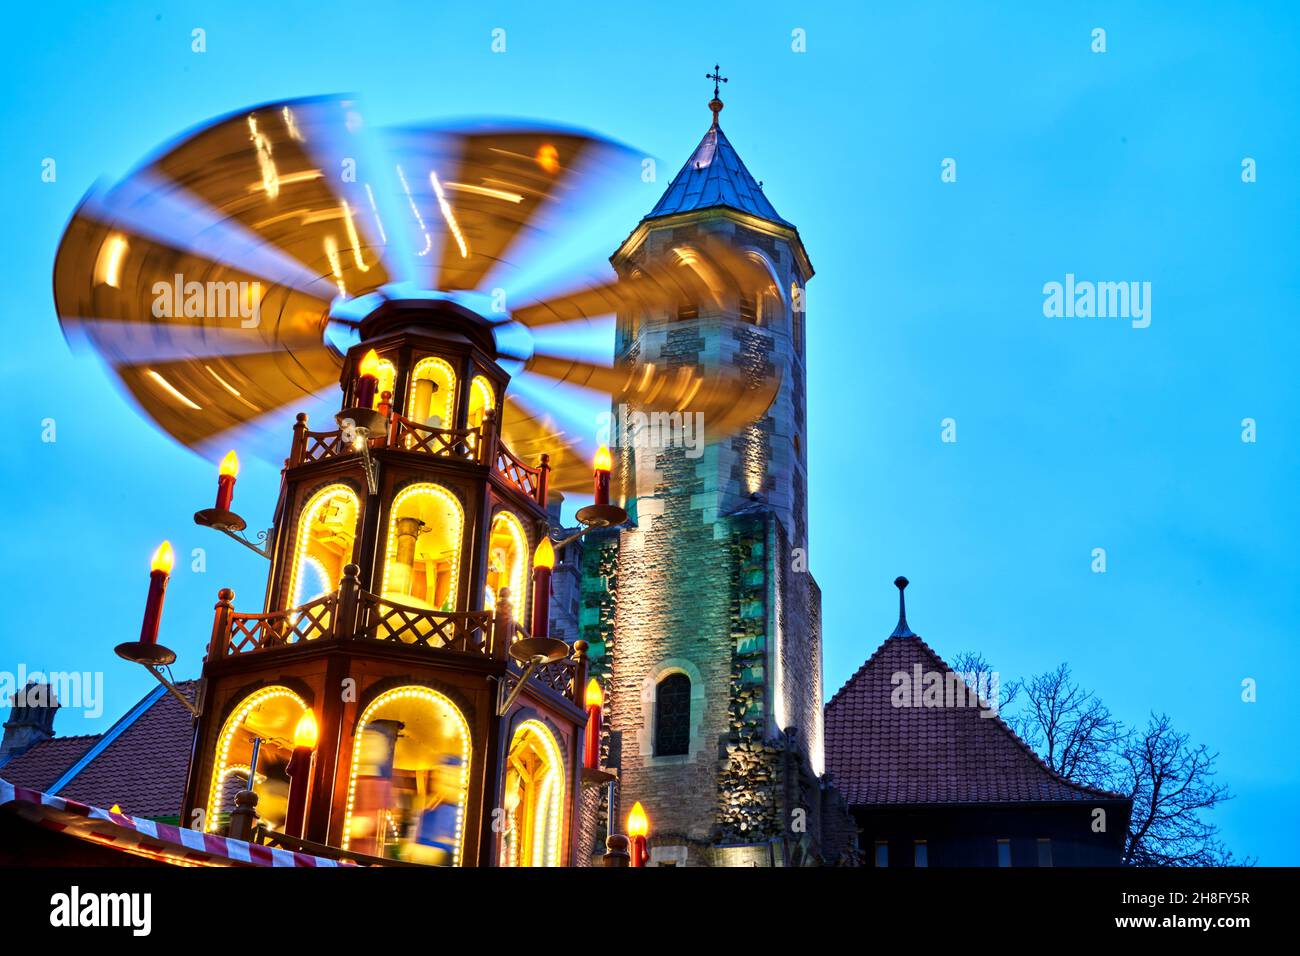 Braunschweig, Germany, November 28, 2021: Rotating illuminated Christmas pyramid in front of the Brunswick Cathedral at the Christmas Market Stock Photo